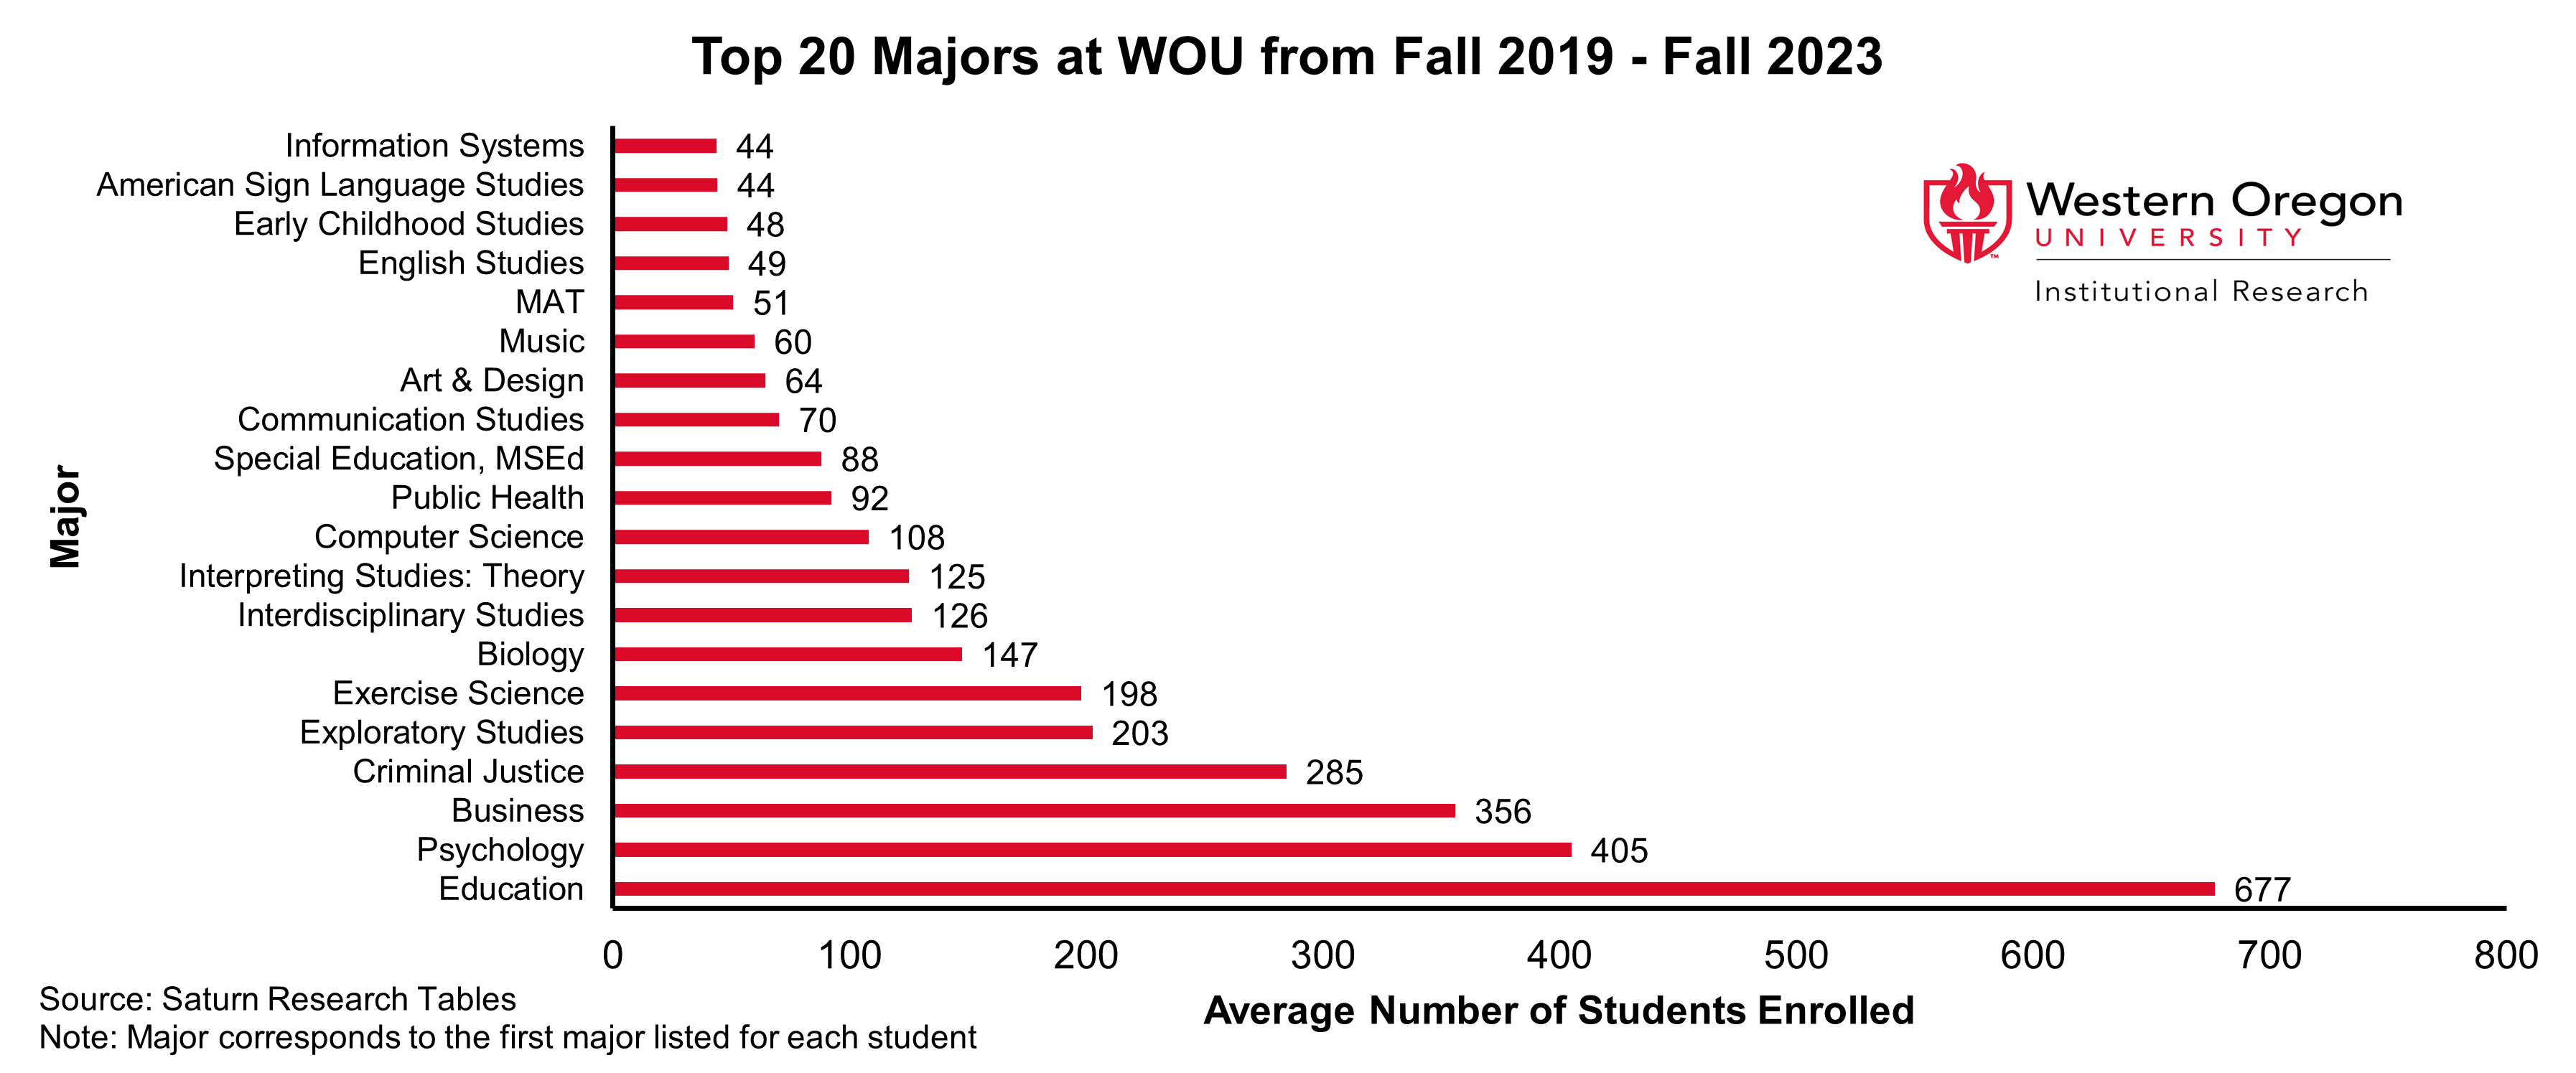 Bar graph of the top 20 majors at WOU between 2019 and 2023, showing that Education, Business, and Psychology are the majors with the largest number of students enrolled.